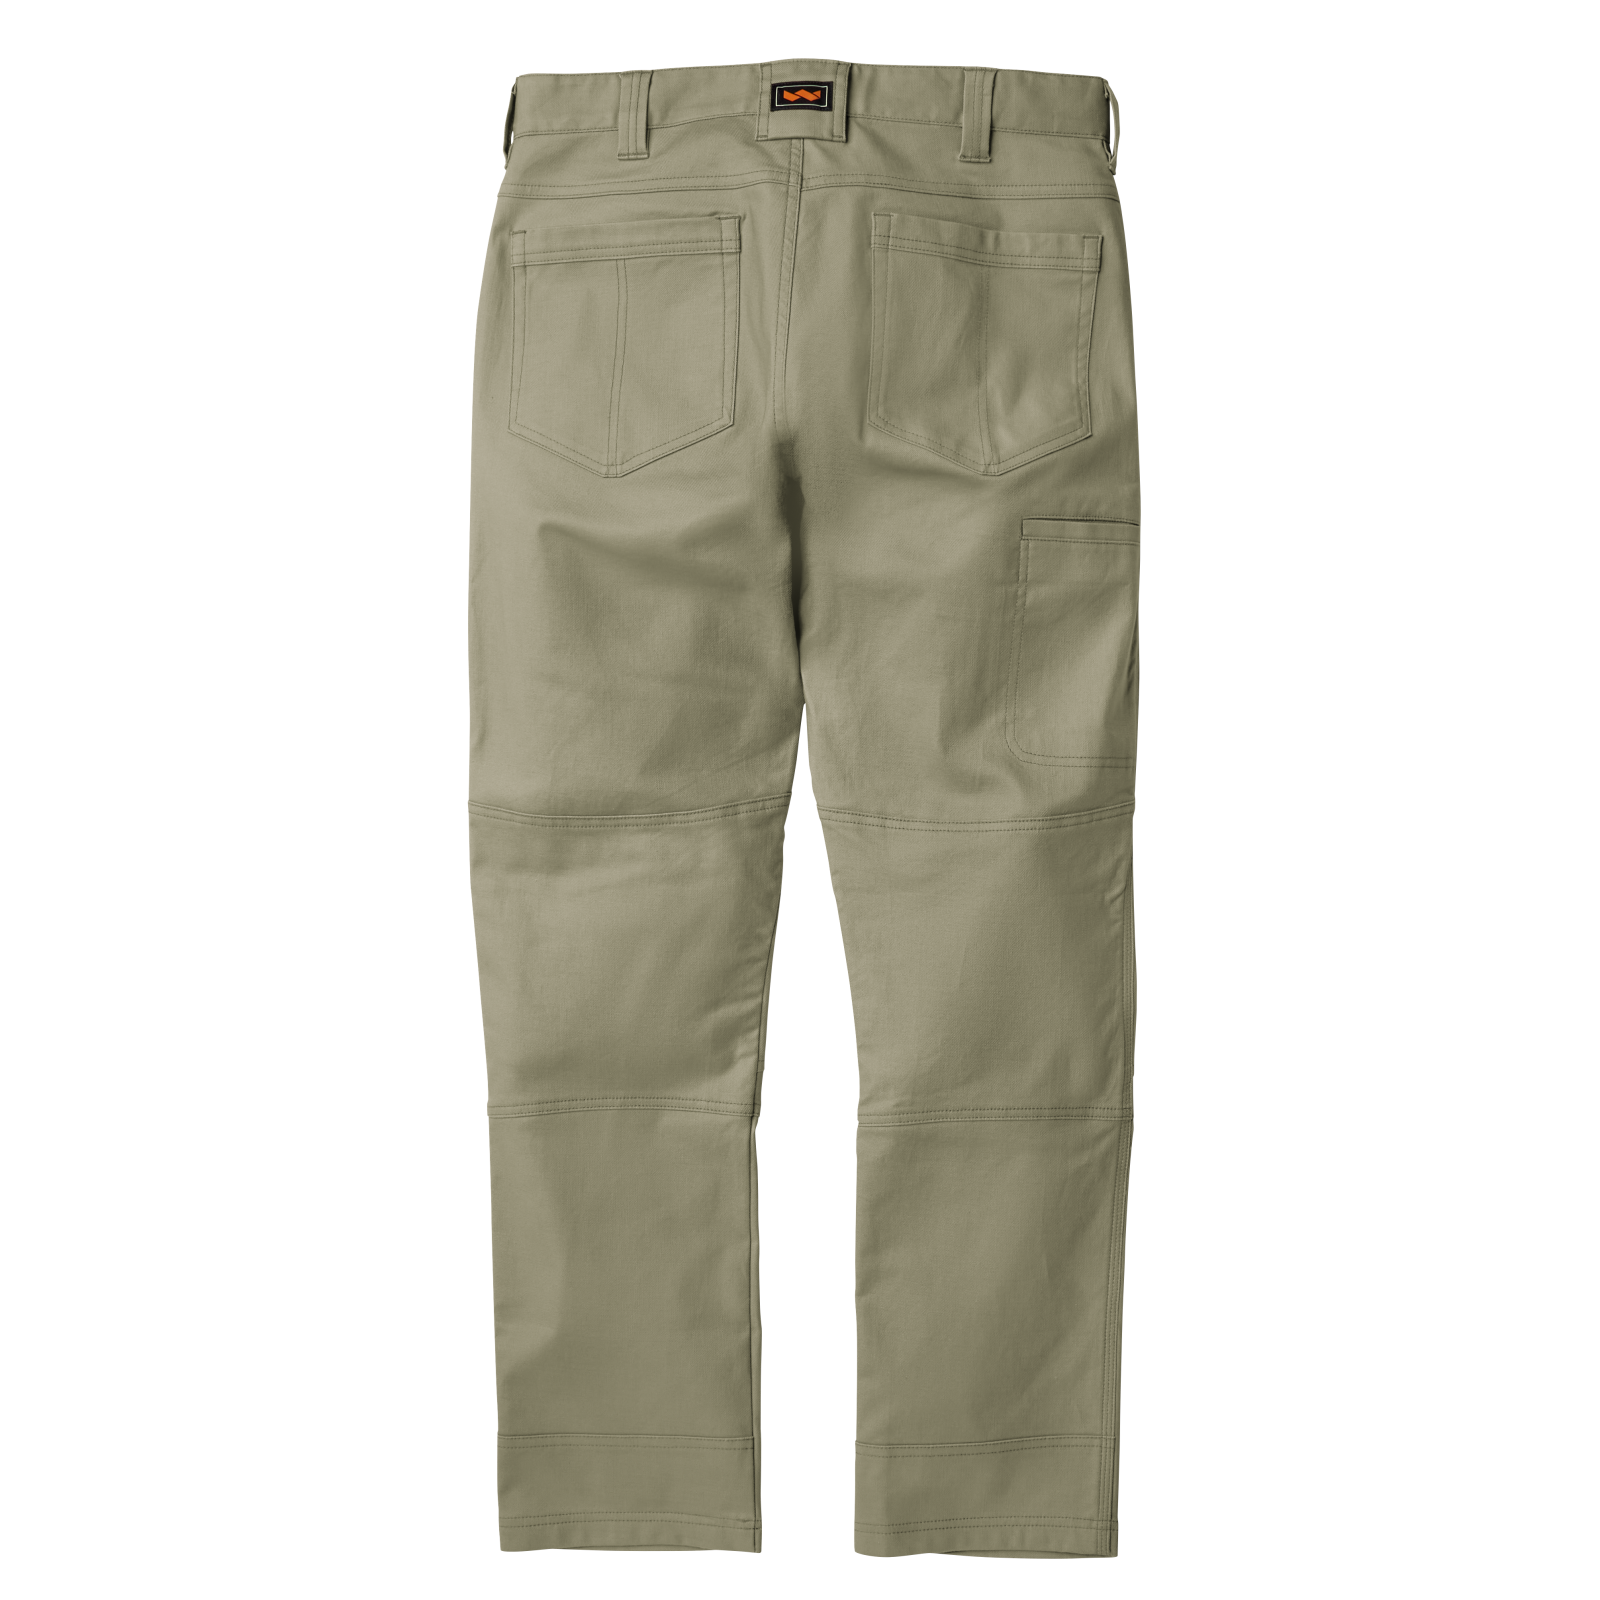 Mud Pie Pants With Knee Patches